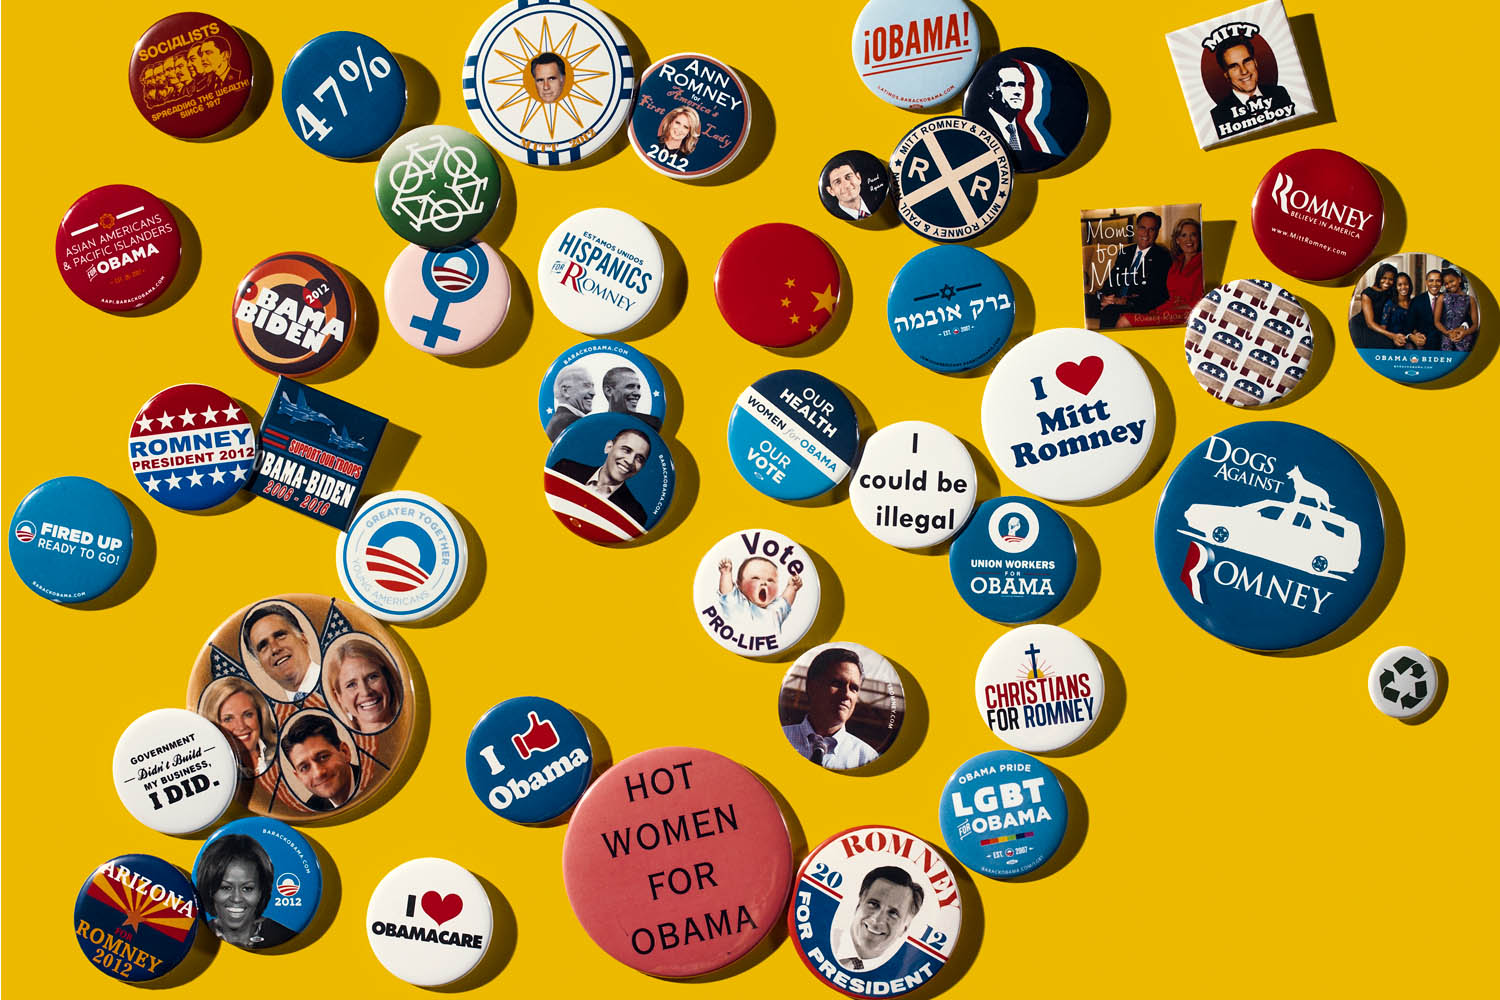 Image: Campaign Buttons